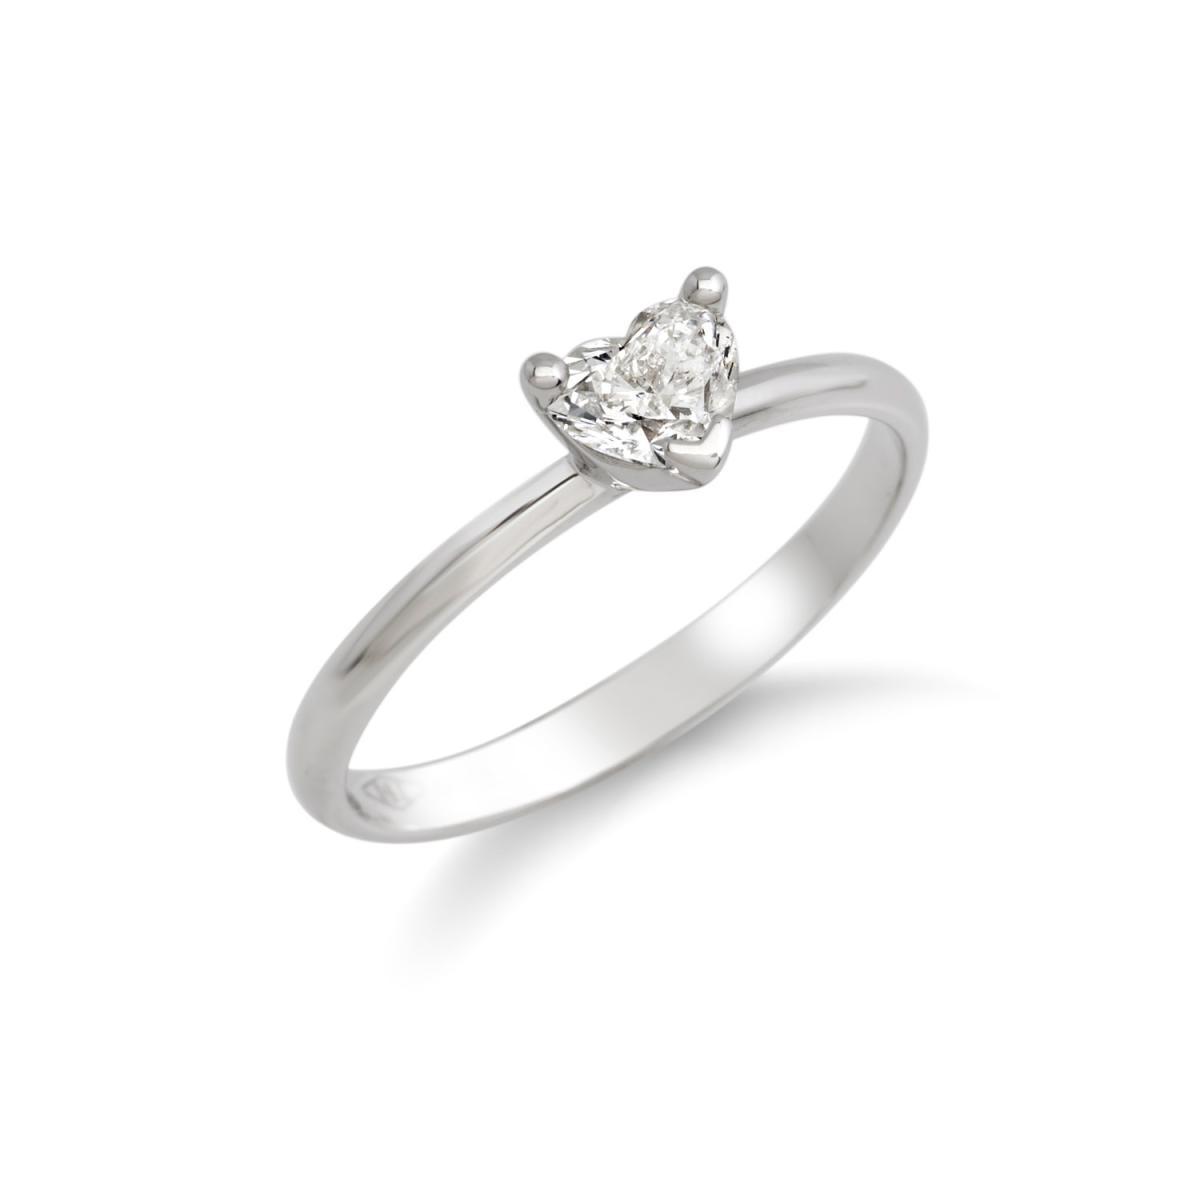 Ring with heart cut diamond